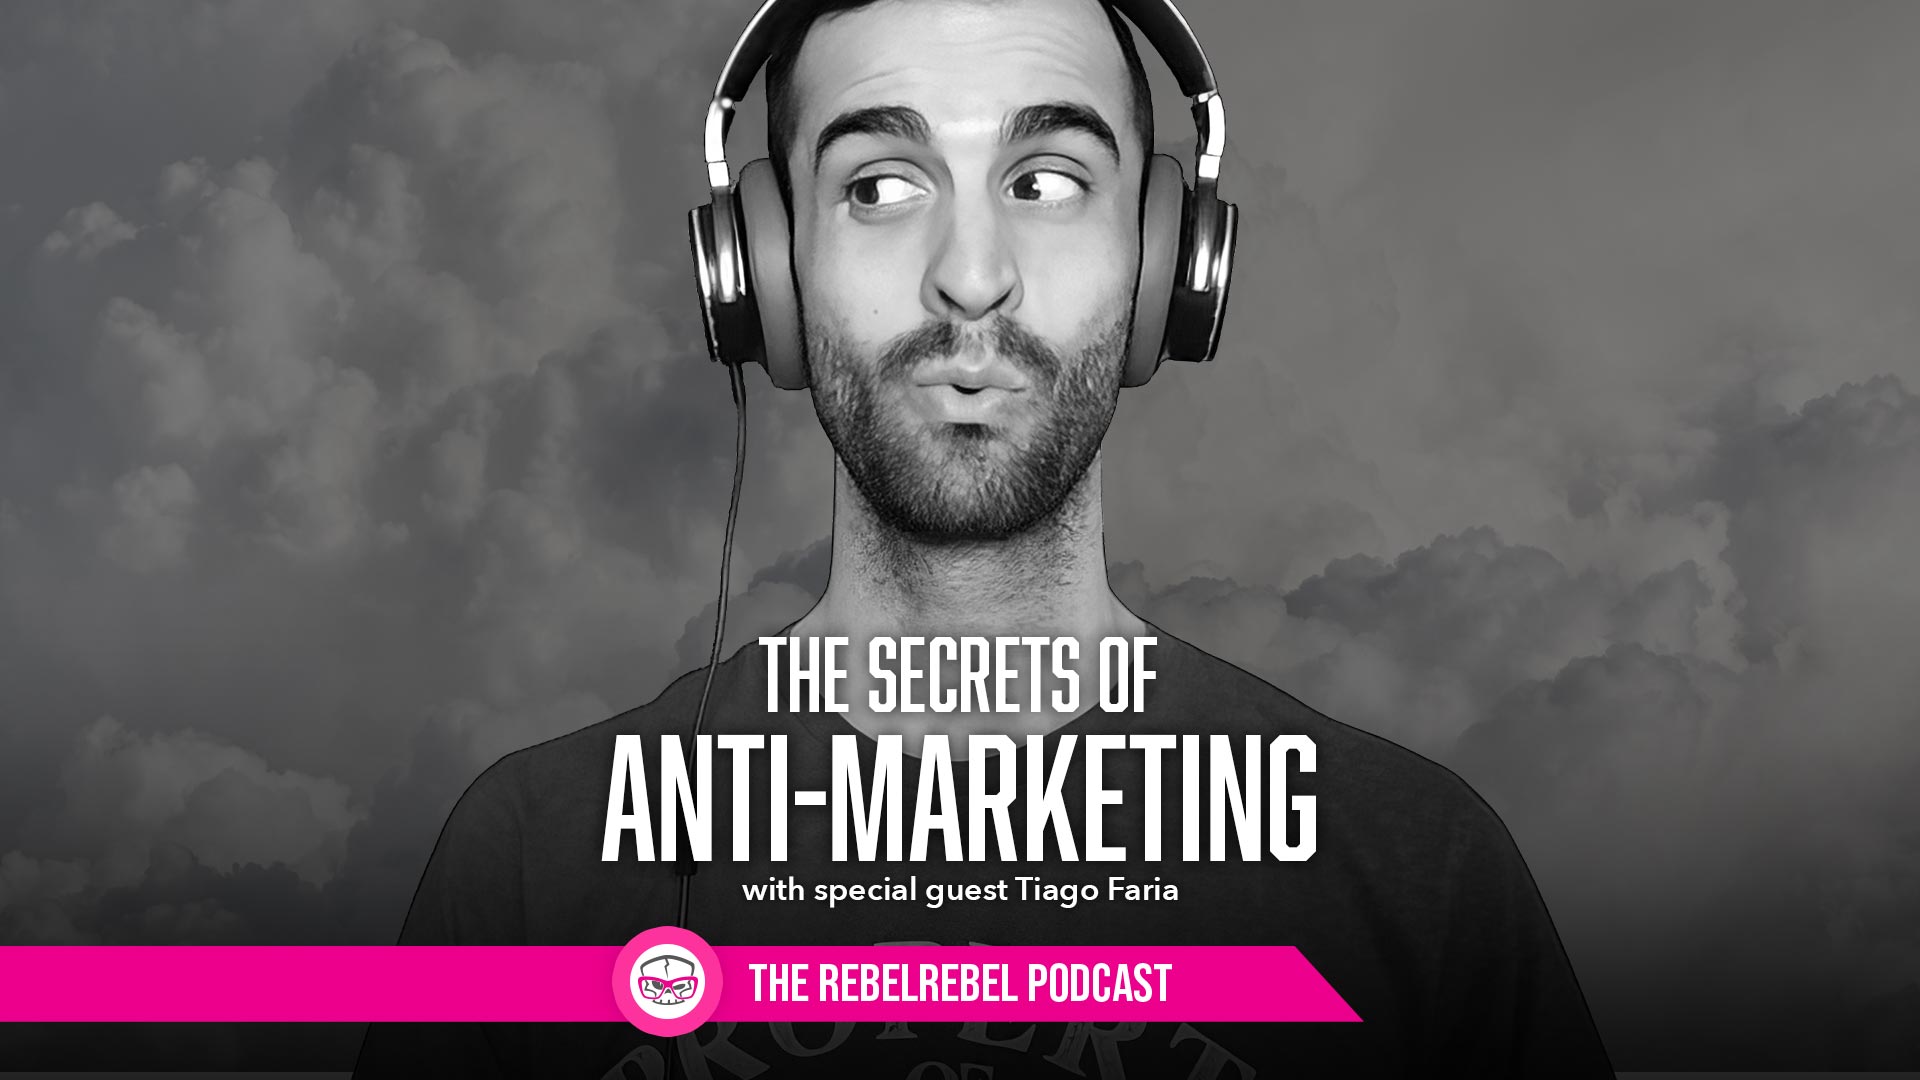 The secrets of ant-marketing with Tiago Faria